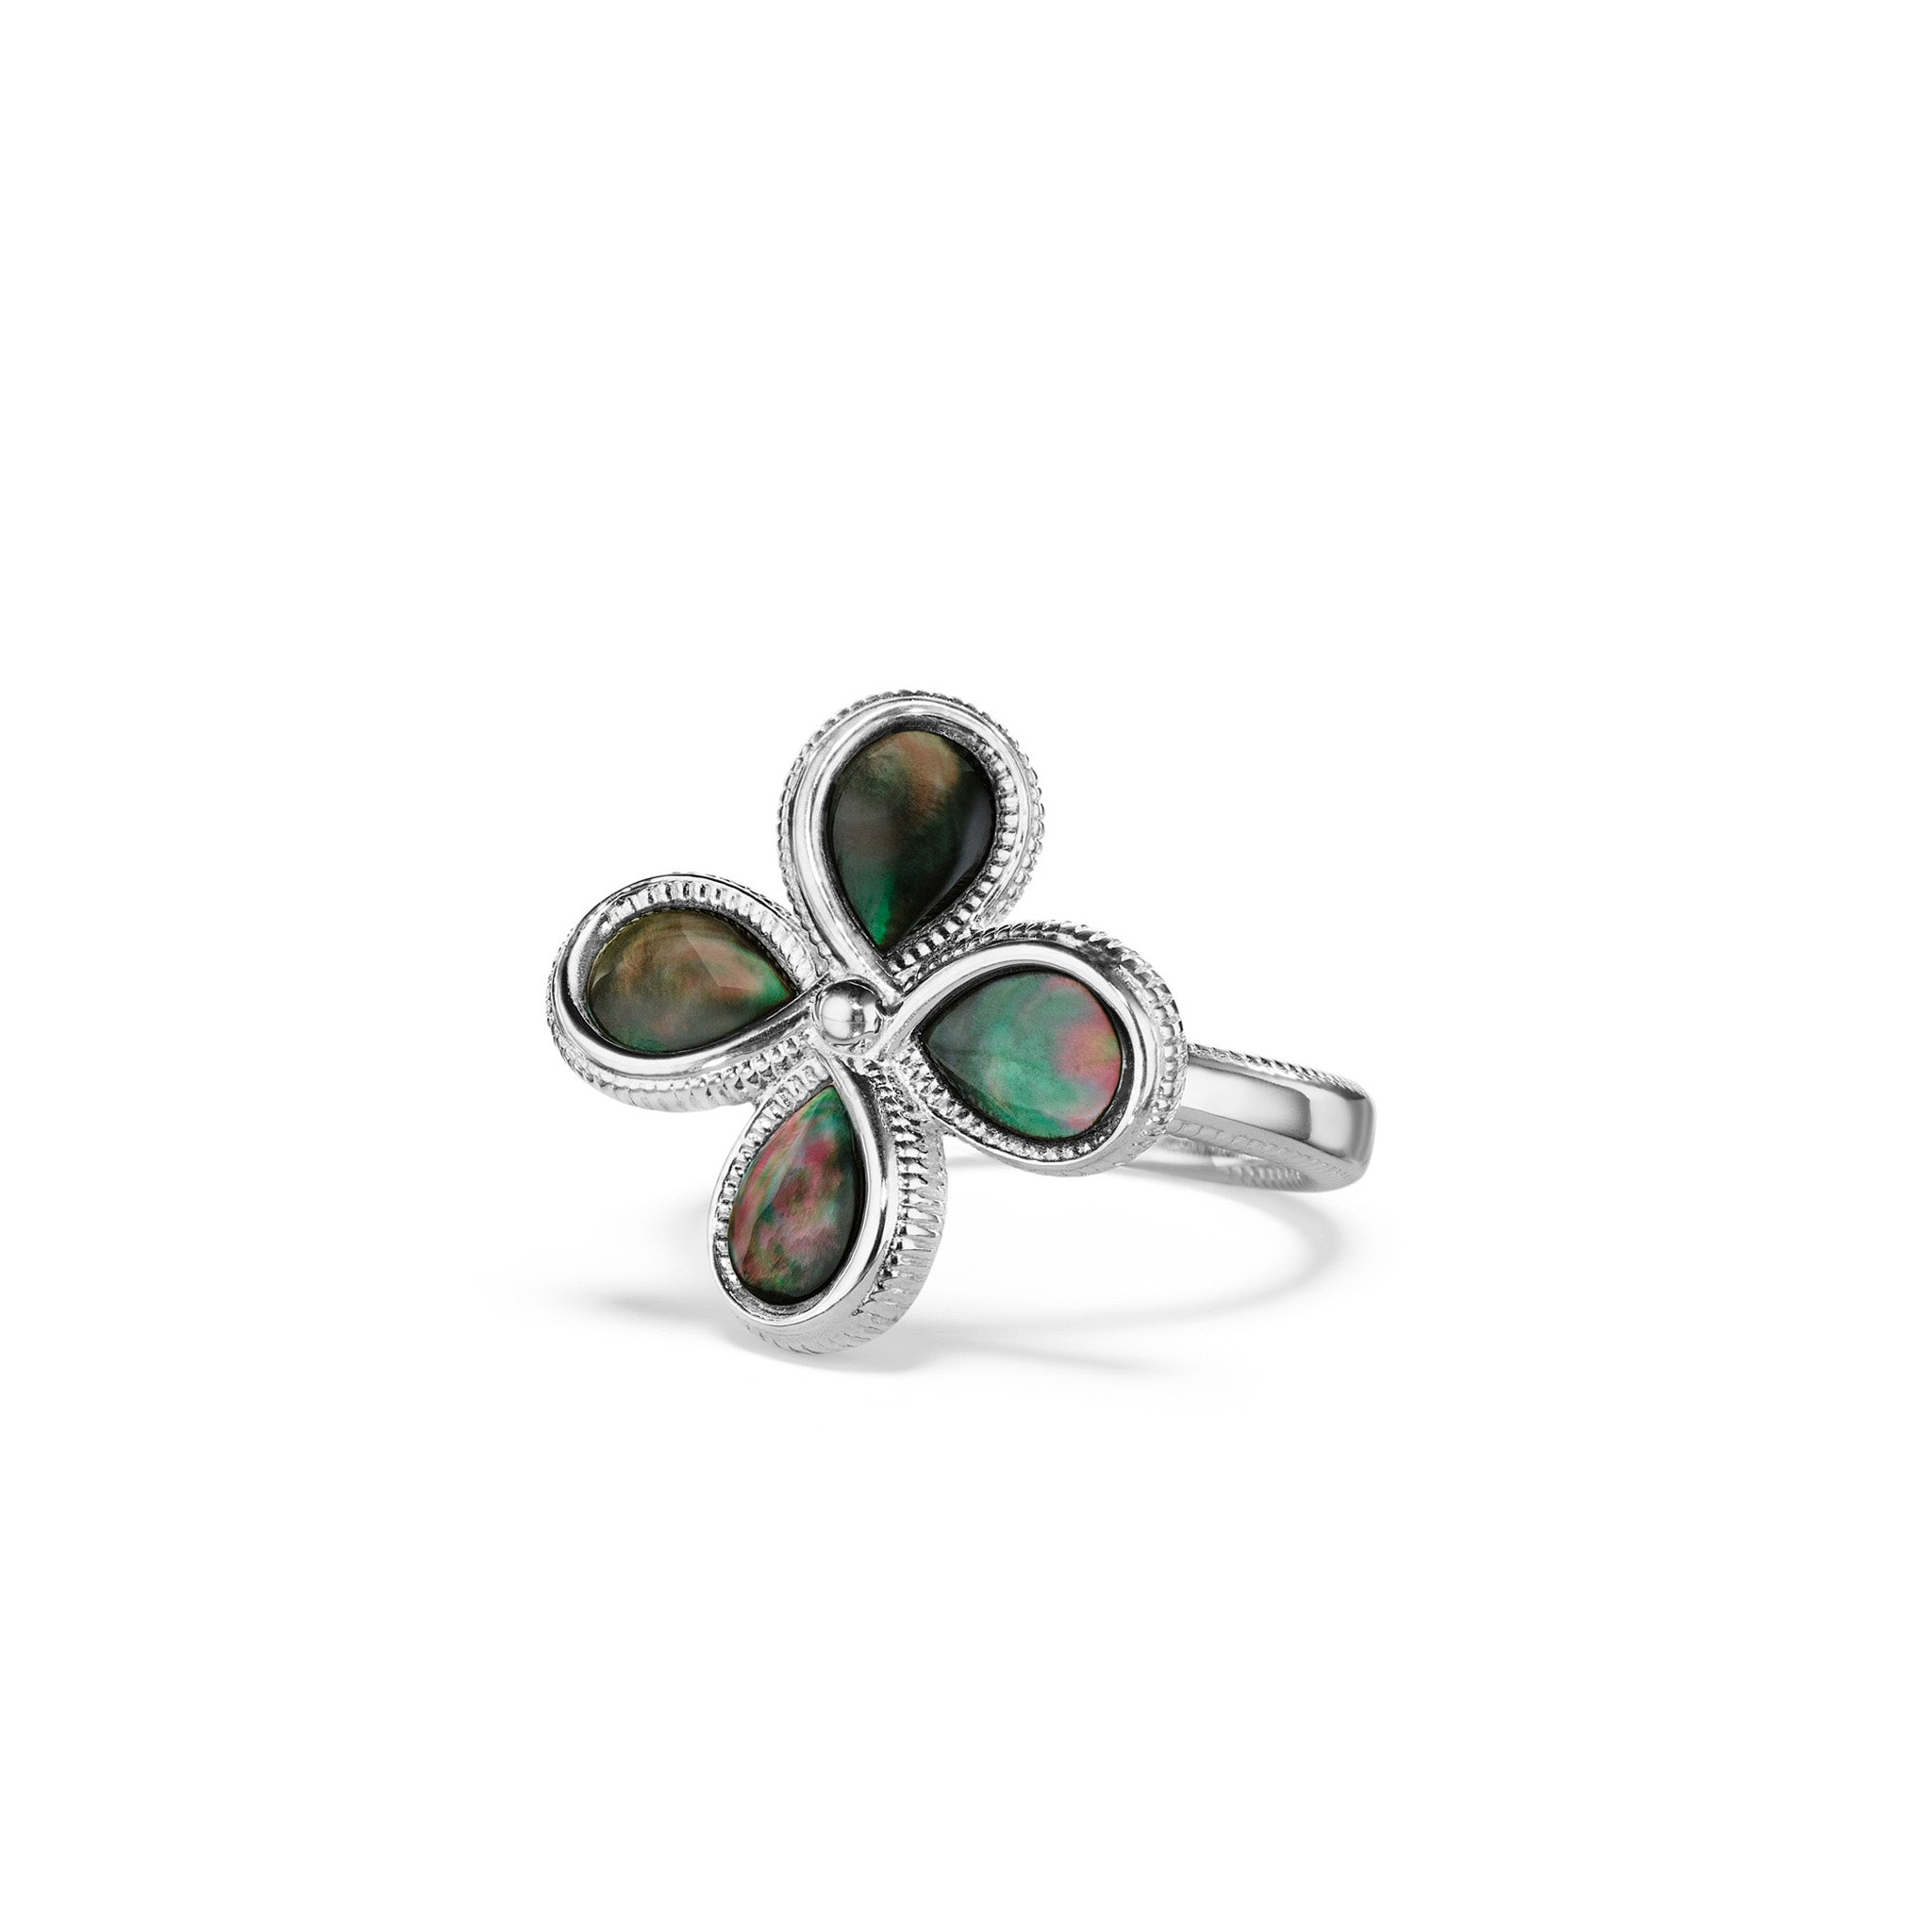 Jardin Flower Ring with Black Mother of Pearl